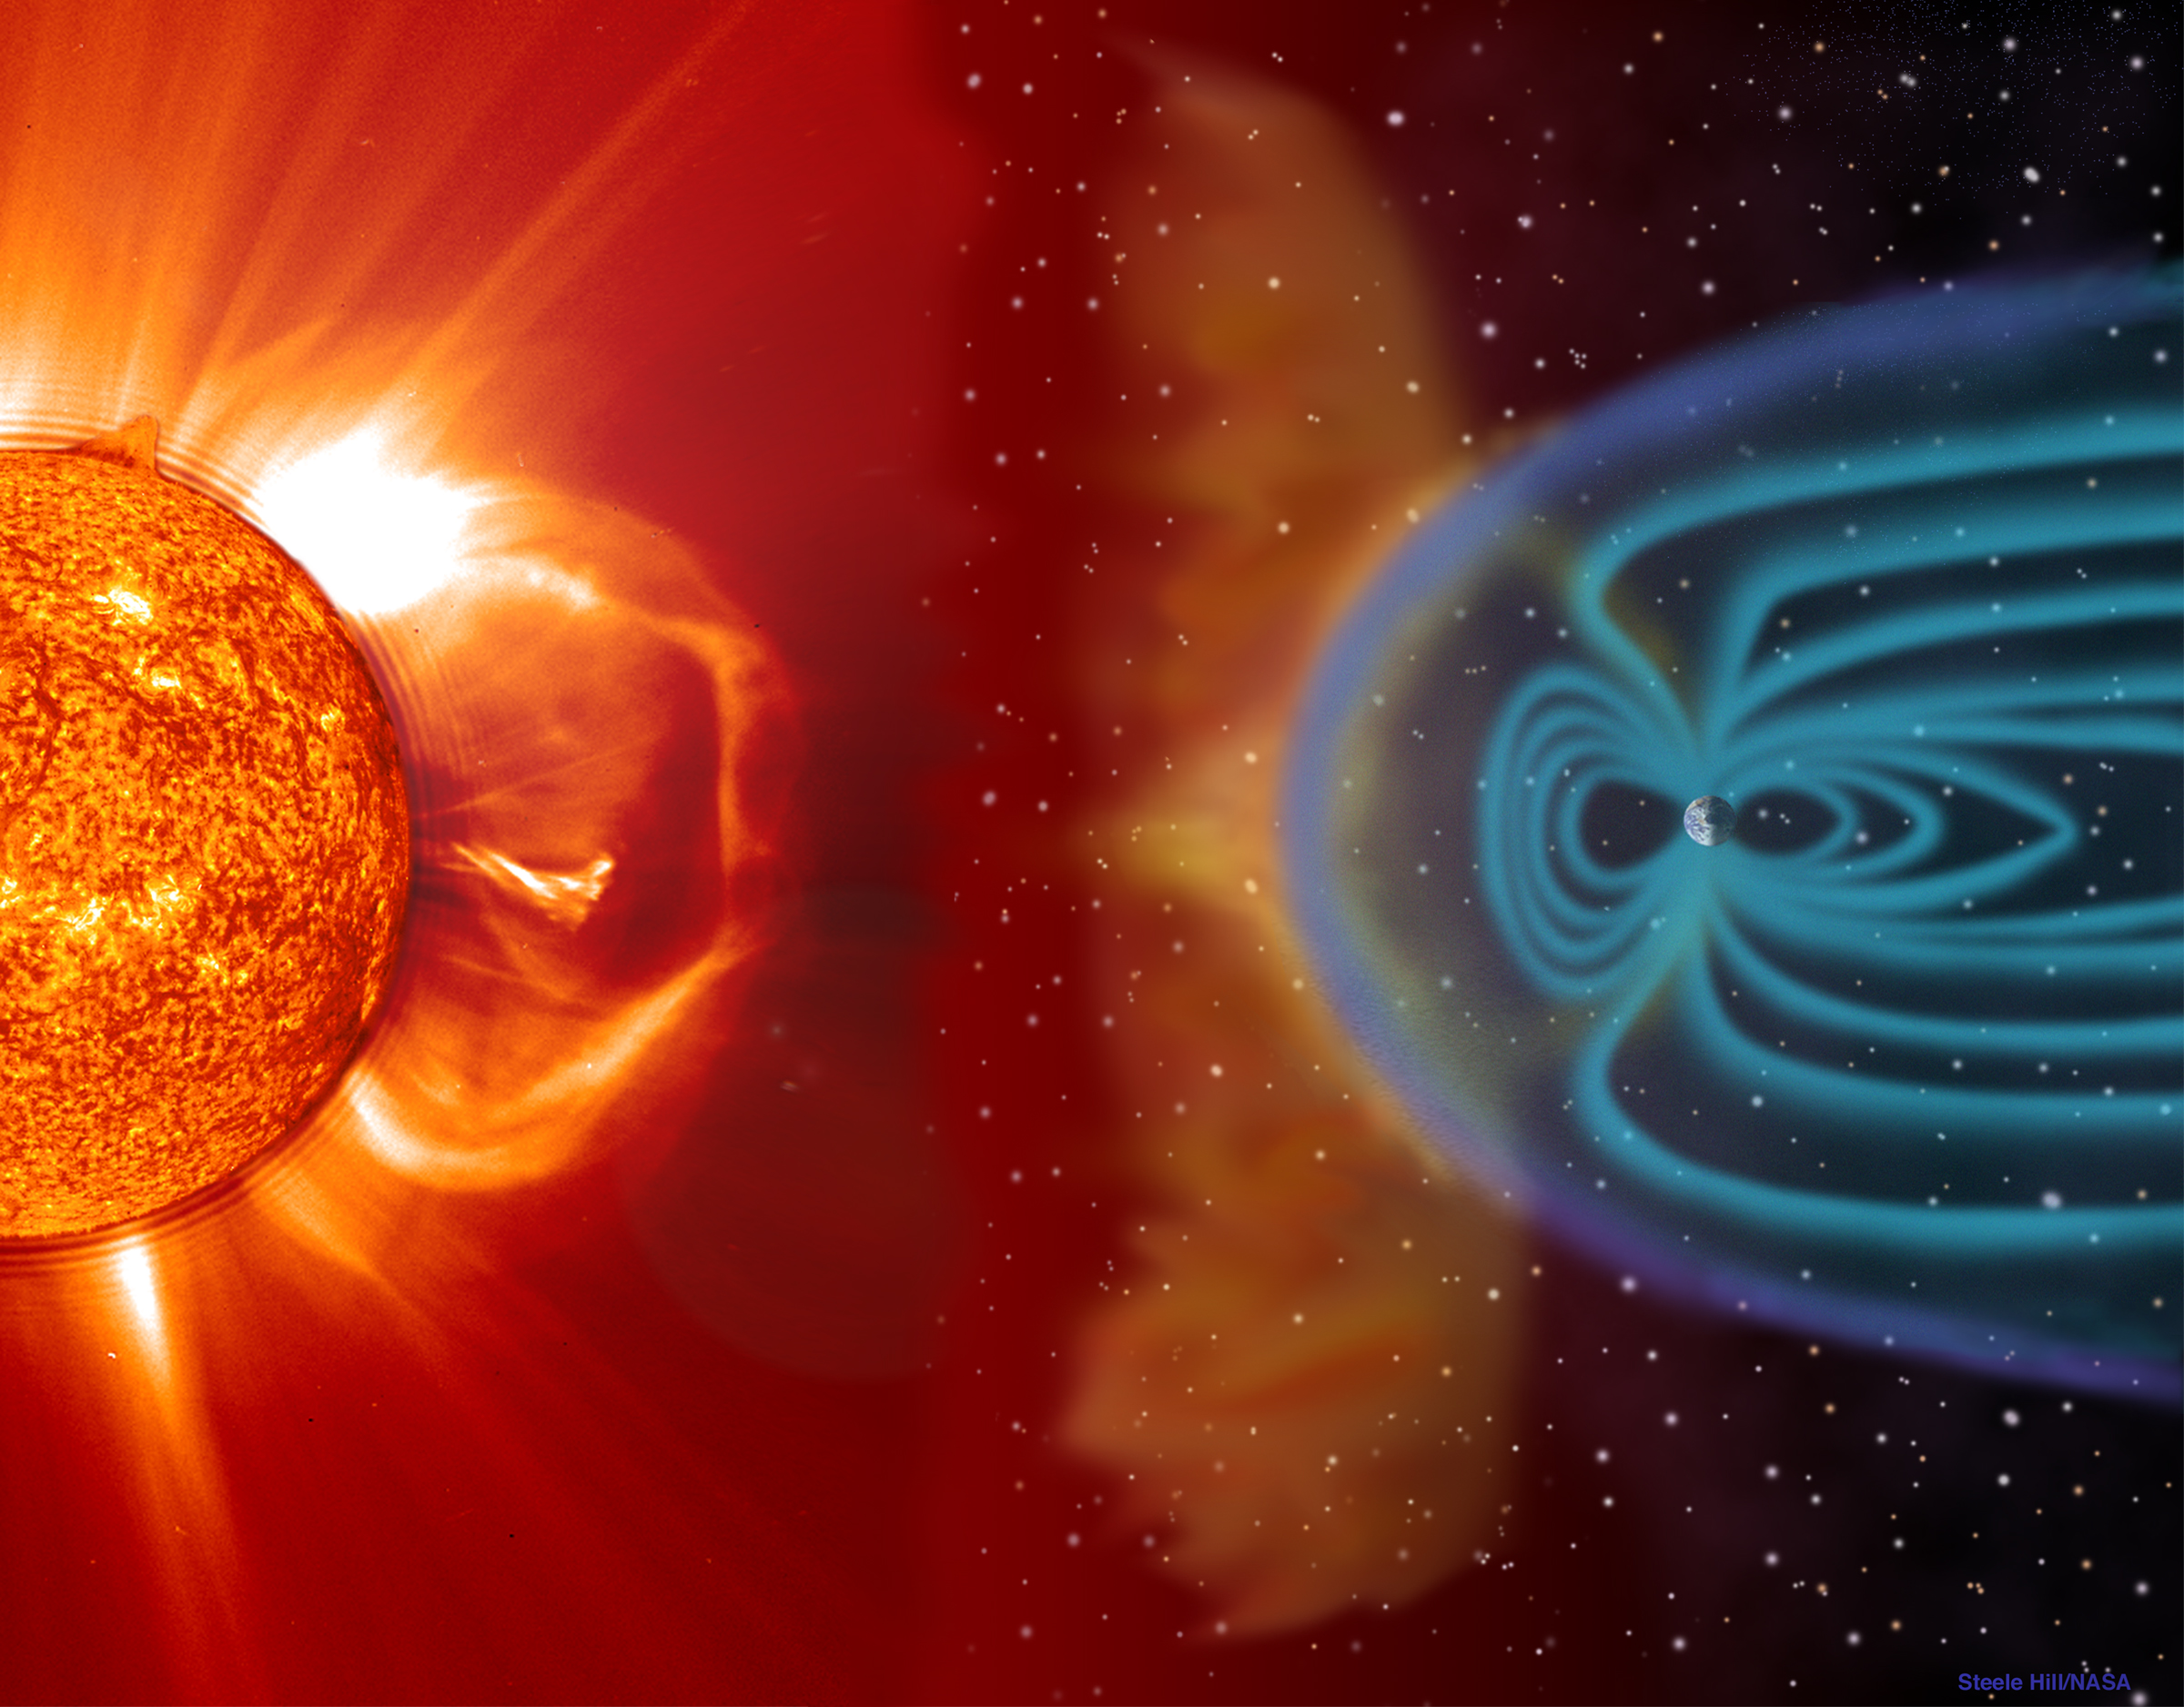 ESA - Coronal mass ejection (CME) blast and subsequent impact at Earth